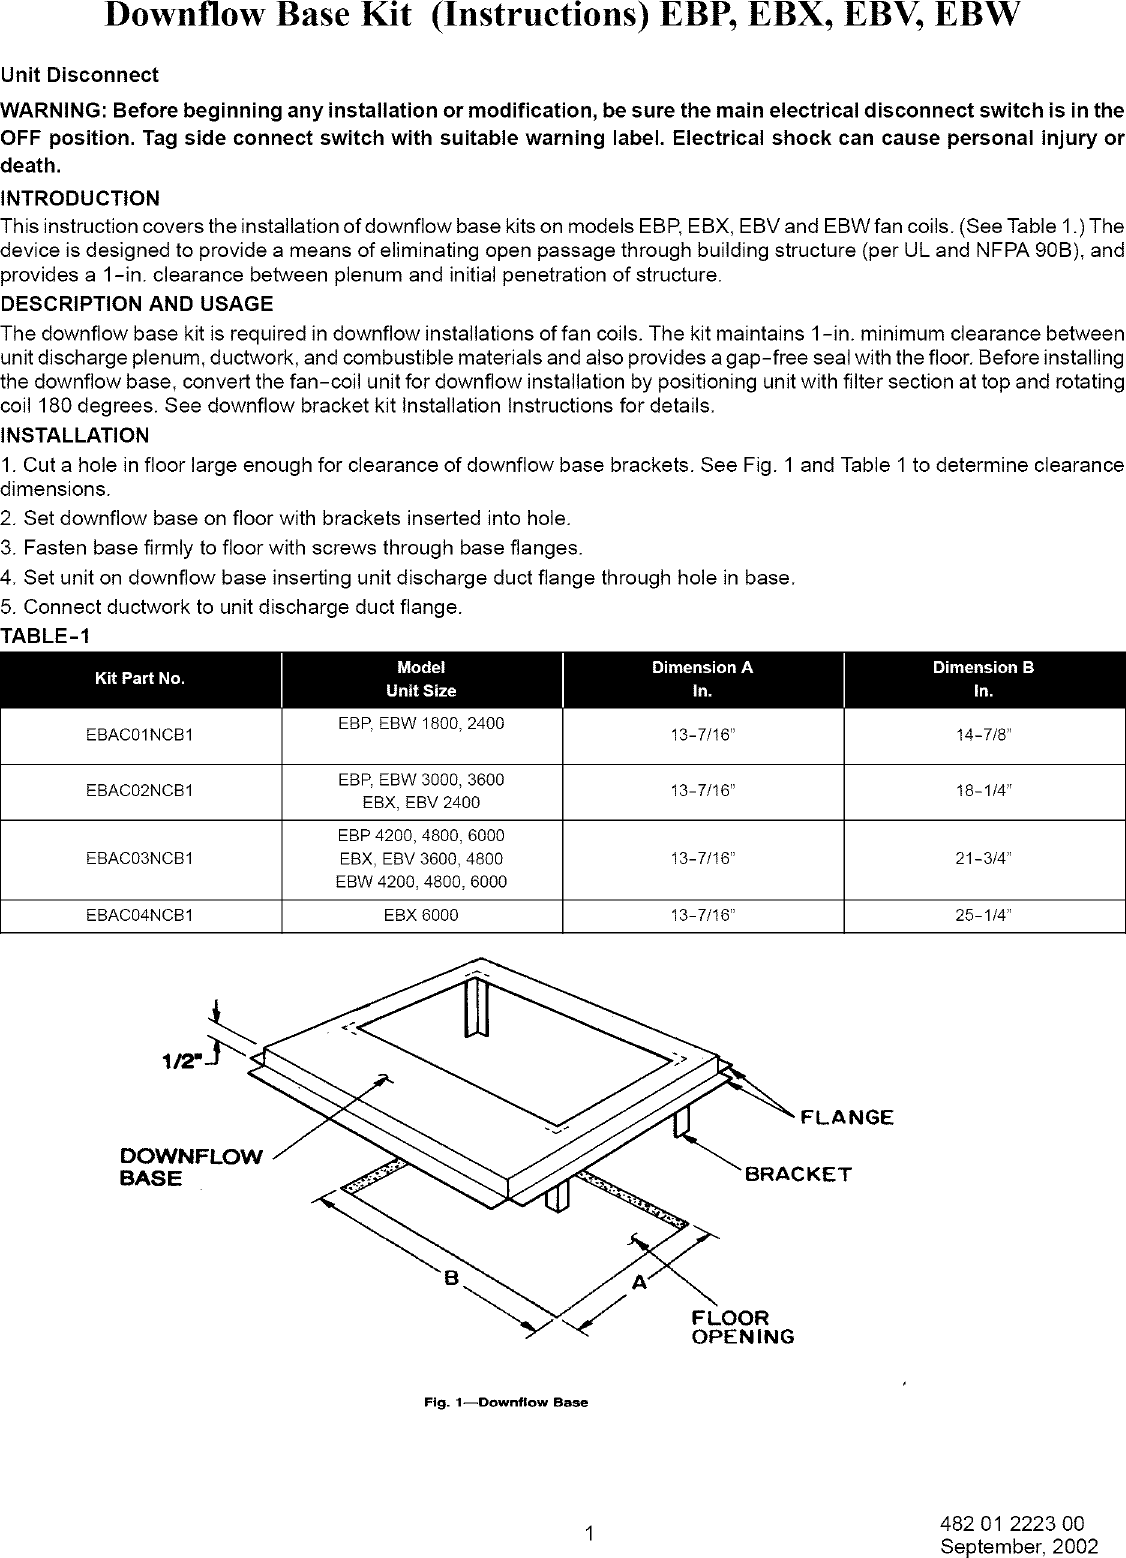 Page 1 of 1 - ICP  Evaporator Coils Manual L0502508